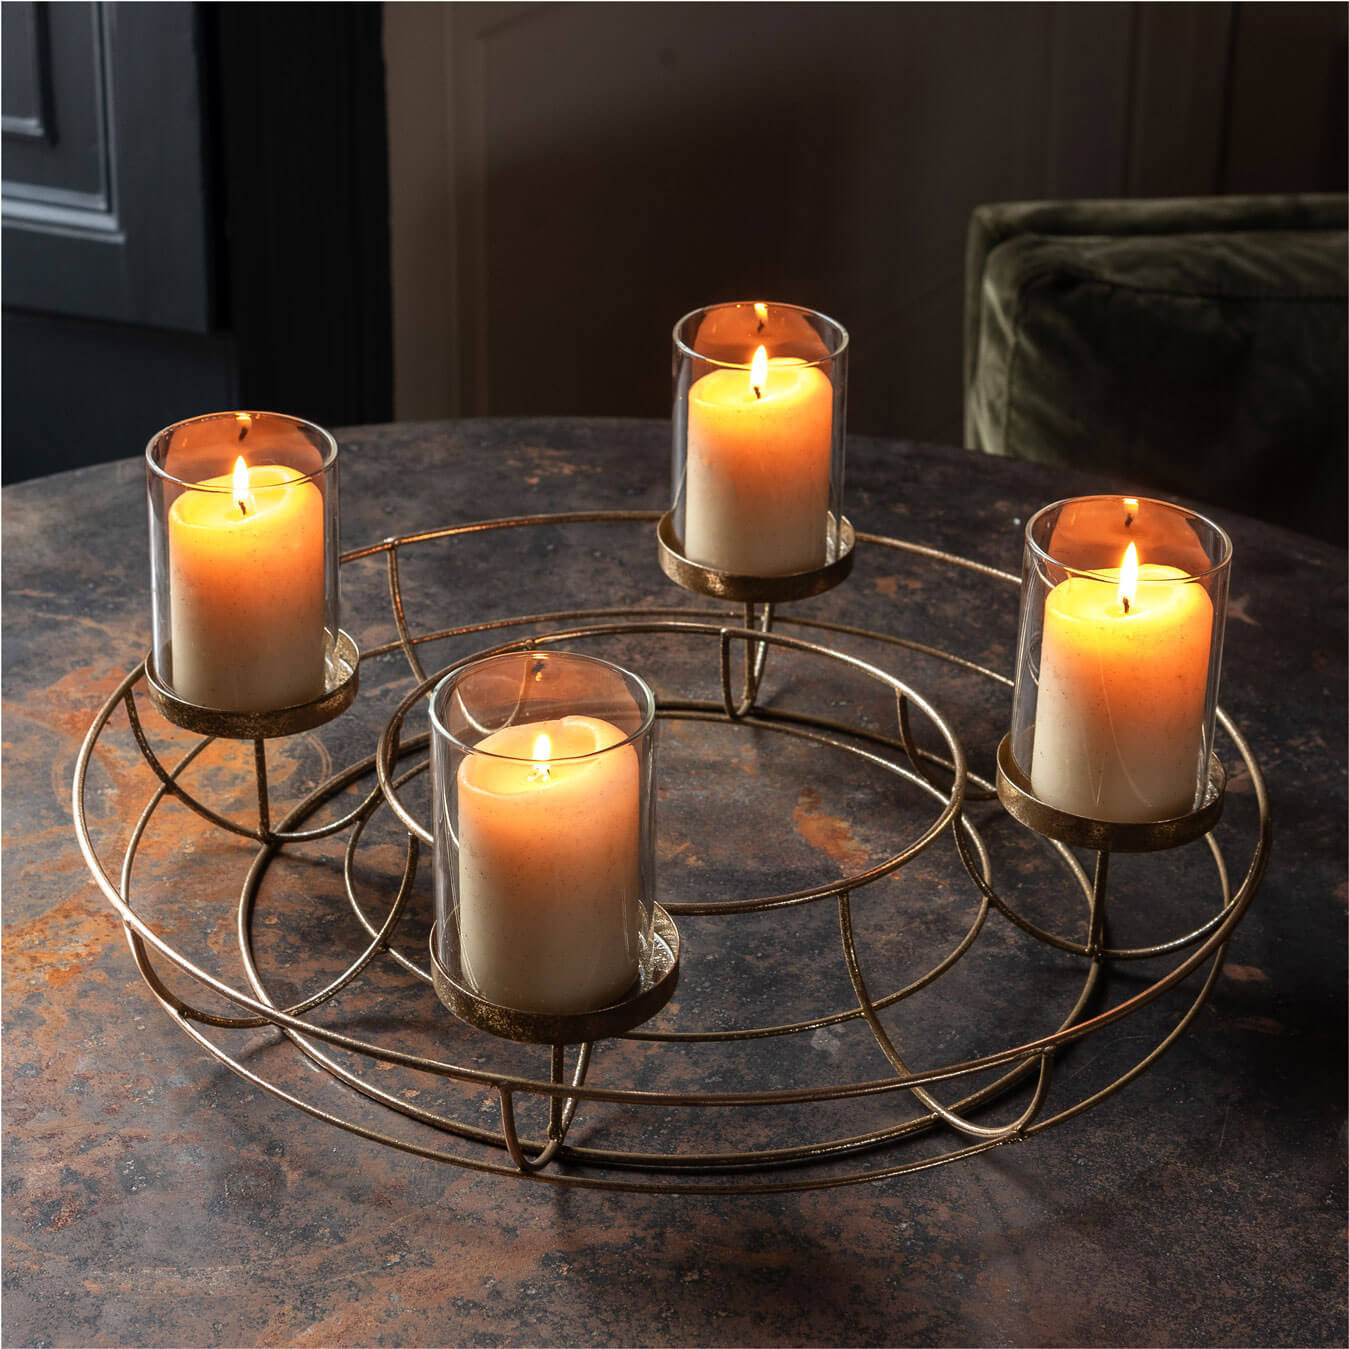 Gold Wreath Candle Holder - image 1